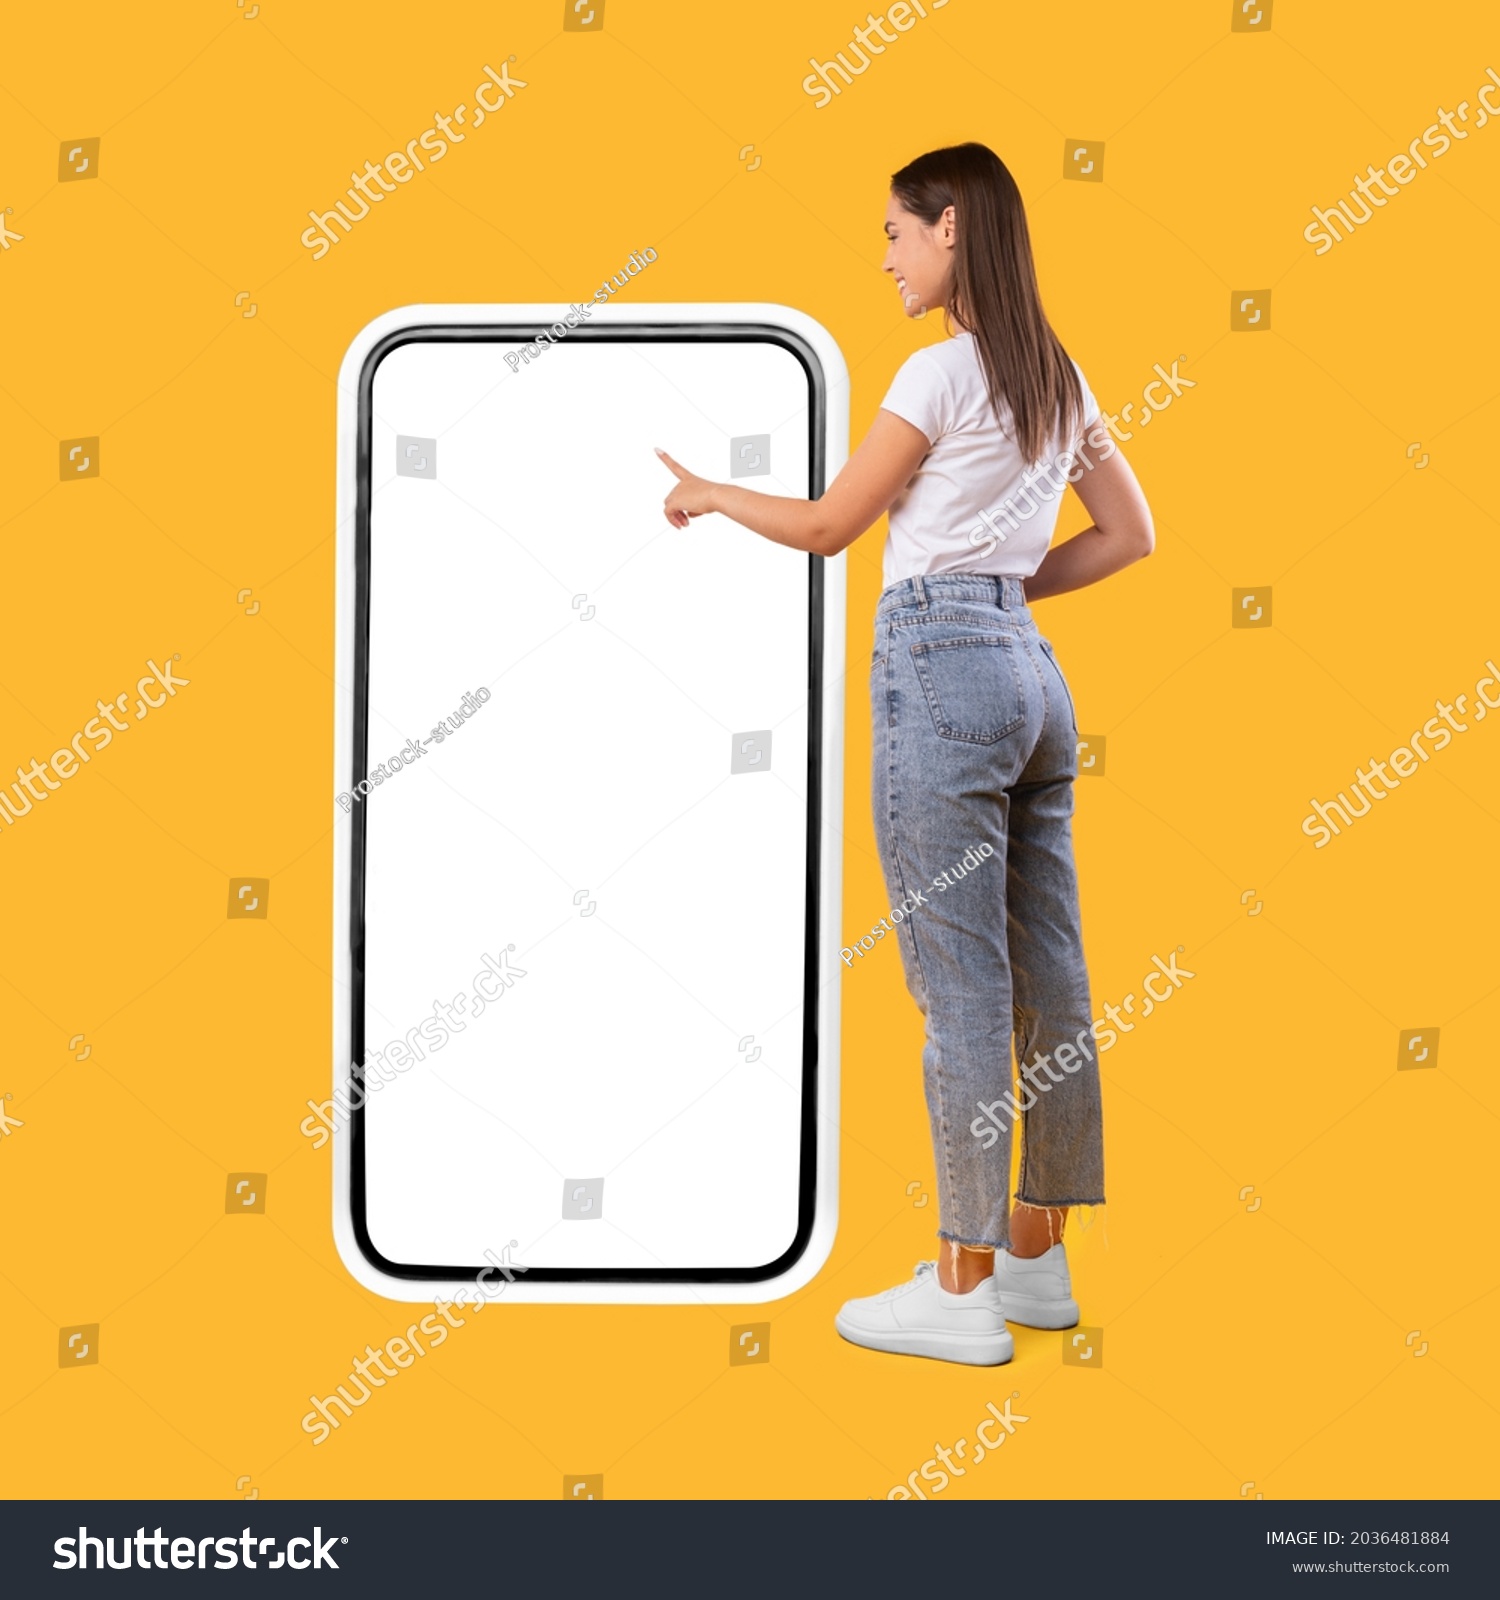 Full Body Length Back View Of Woman Using Big Smartphone With Blank White Screen And Touching Display Panel With Finger, Cheerful Lady Standing On Yellow Background, Ordering Food Delivery, Mock Up #2036481884